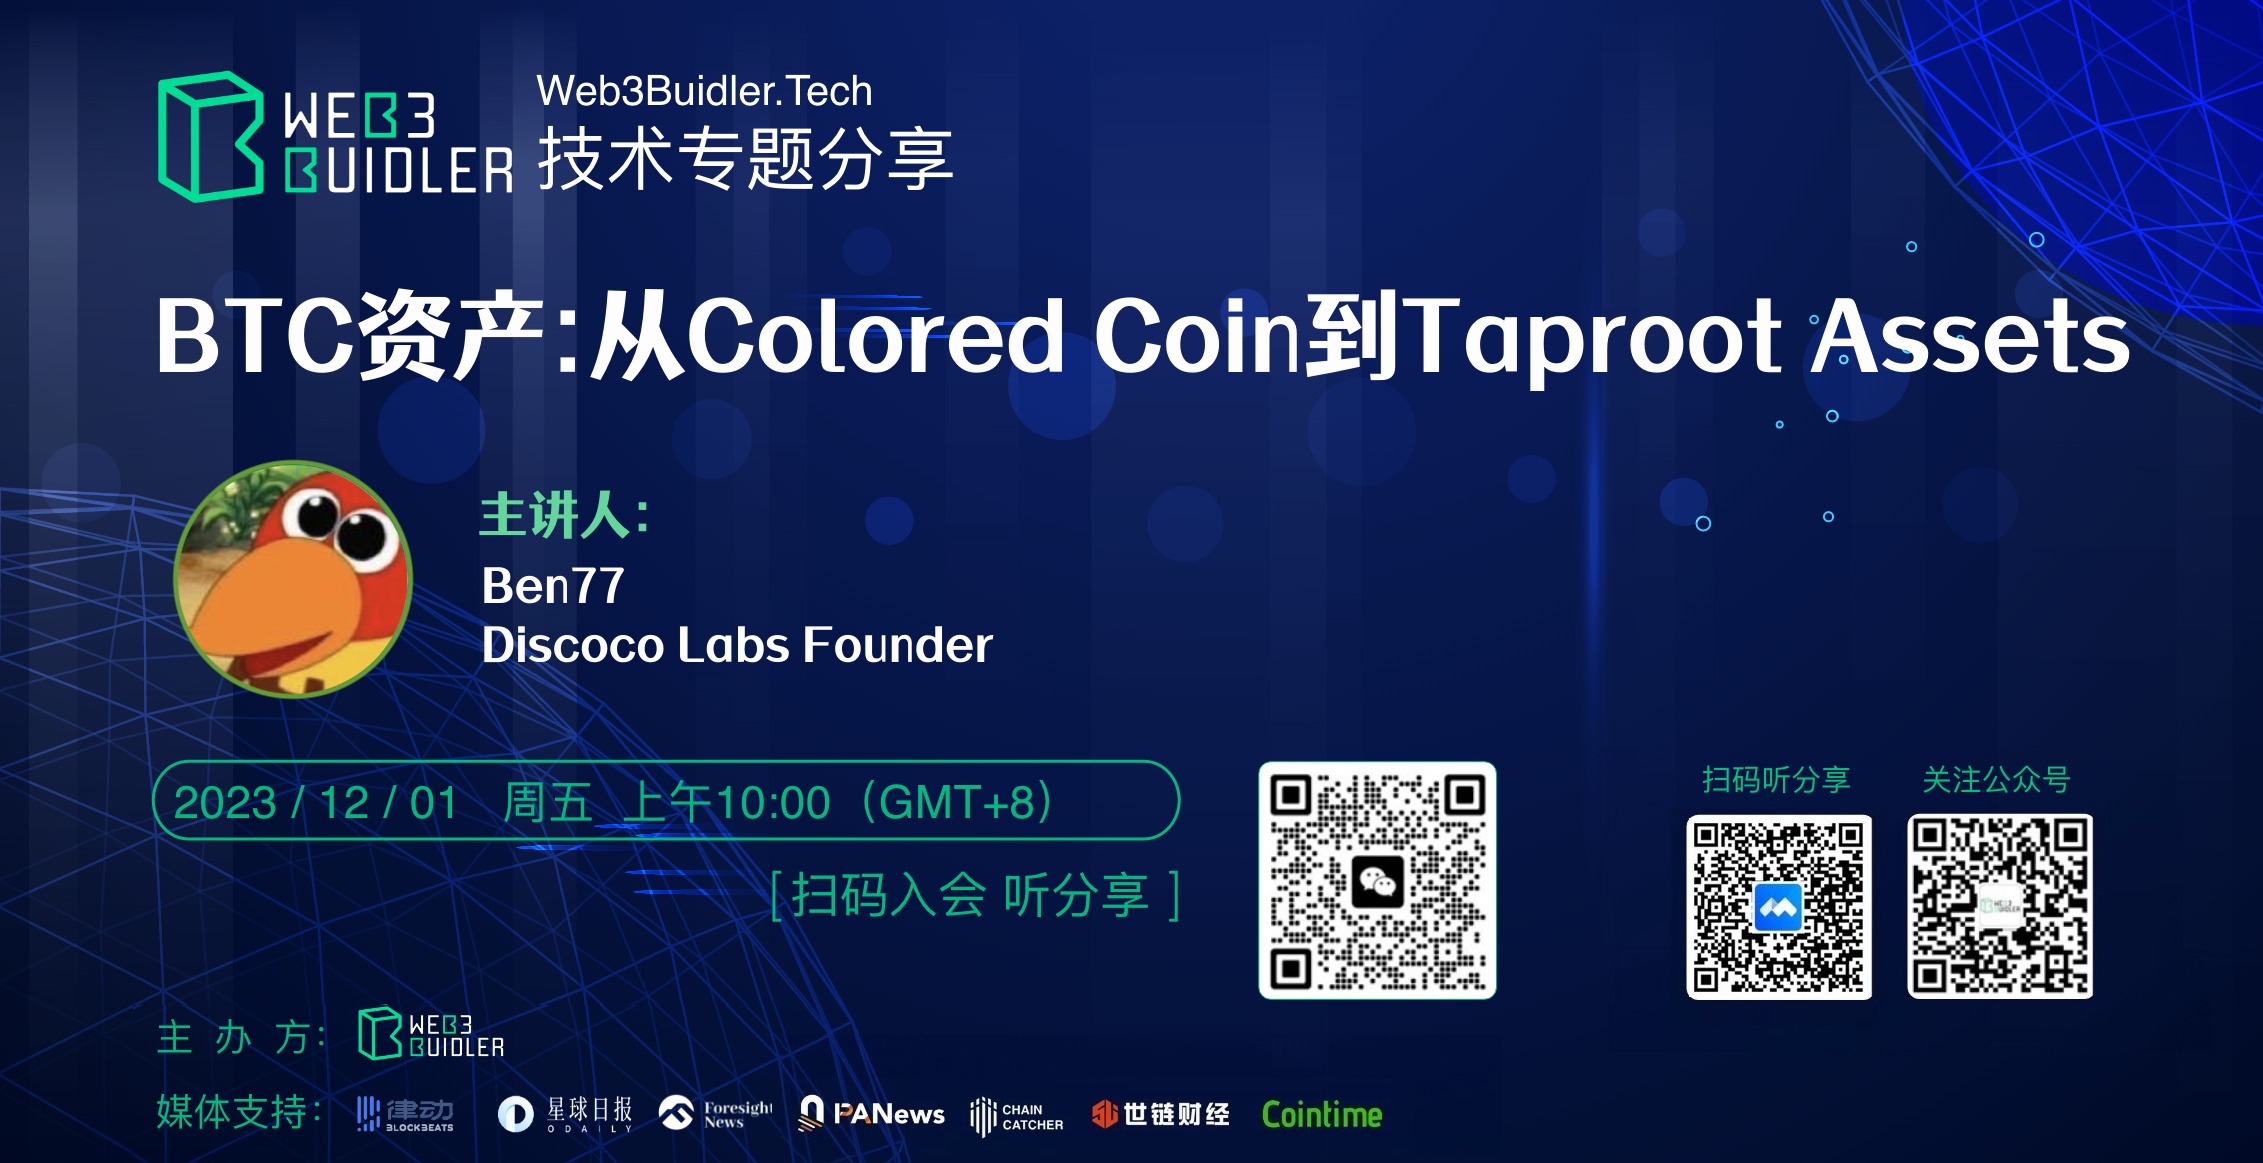 BTC资产：从Colored Coin到Taproot Assets